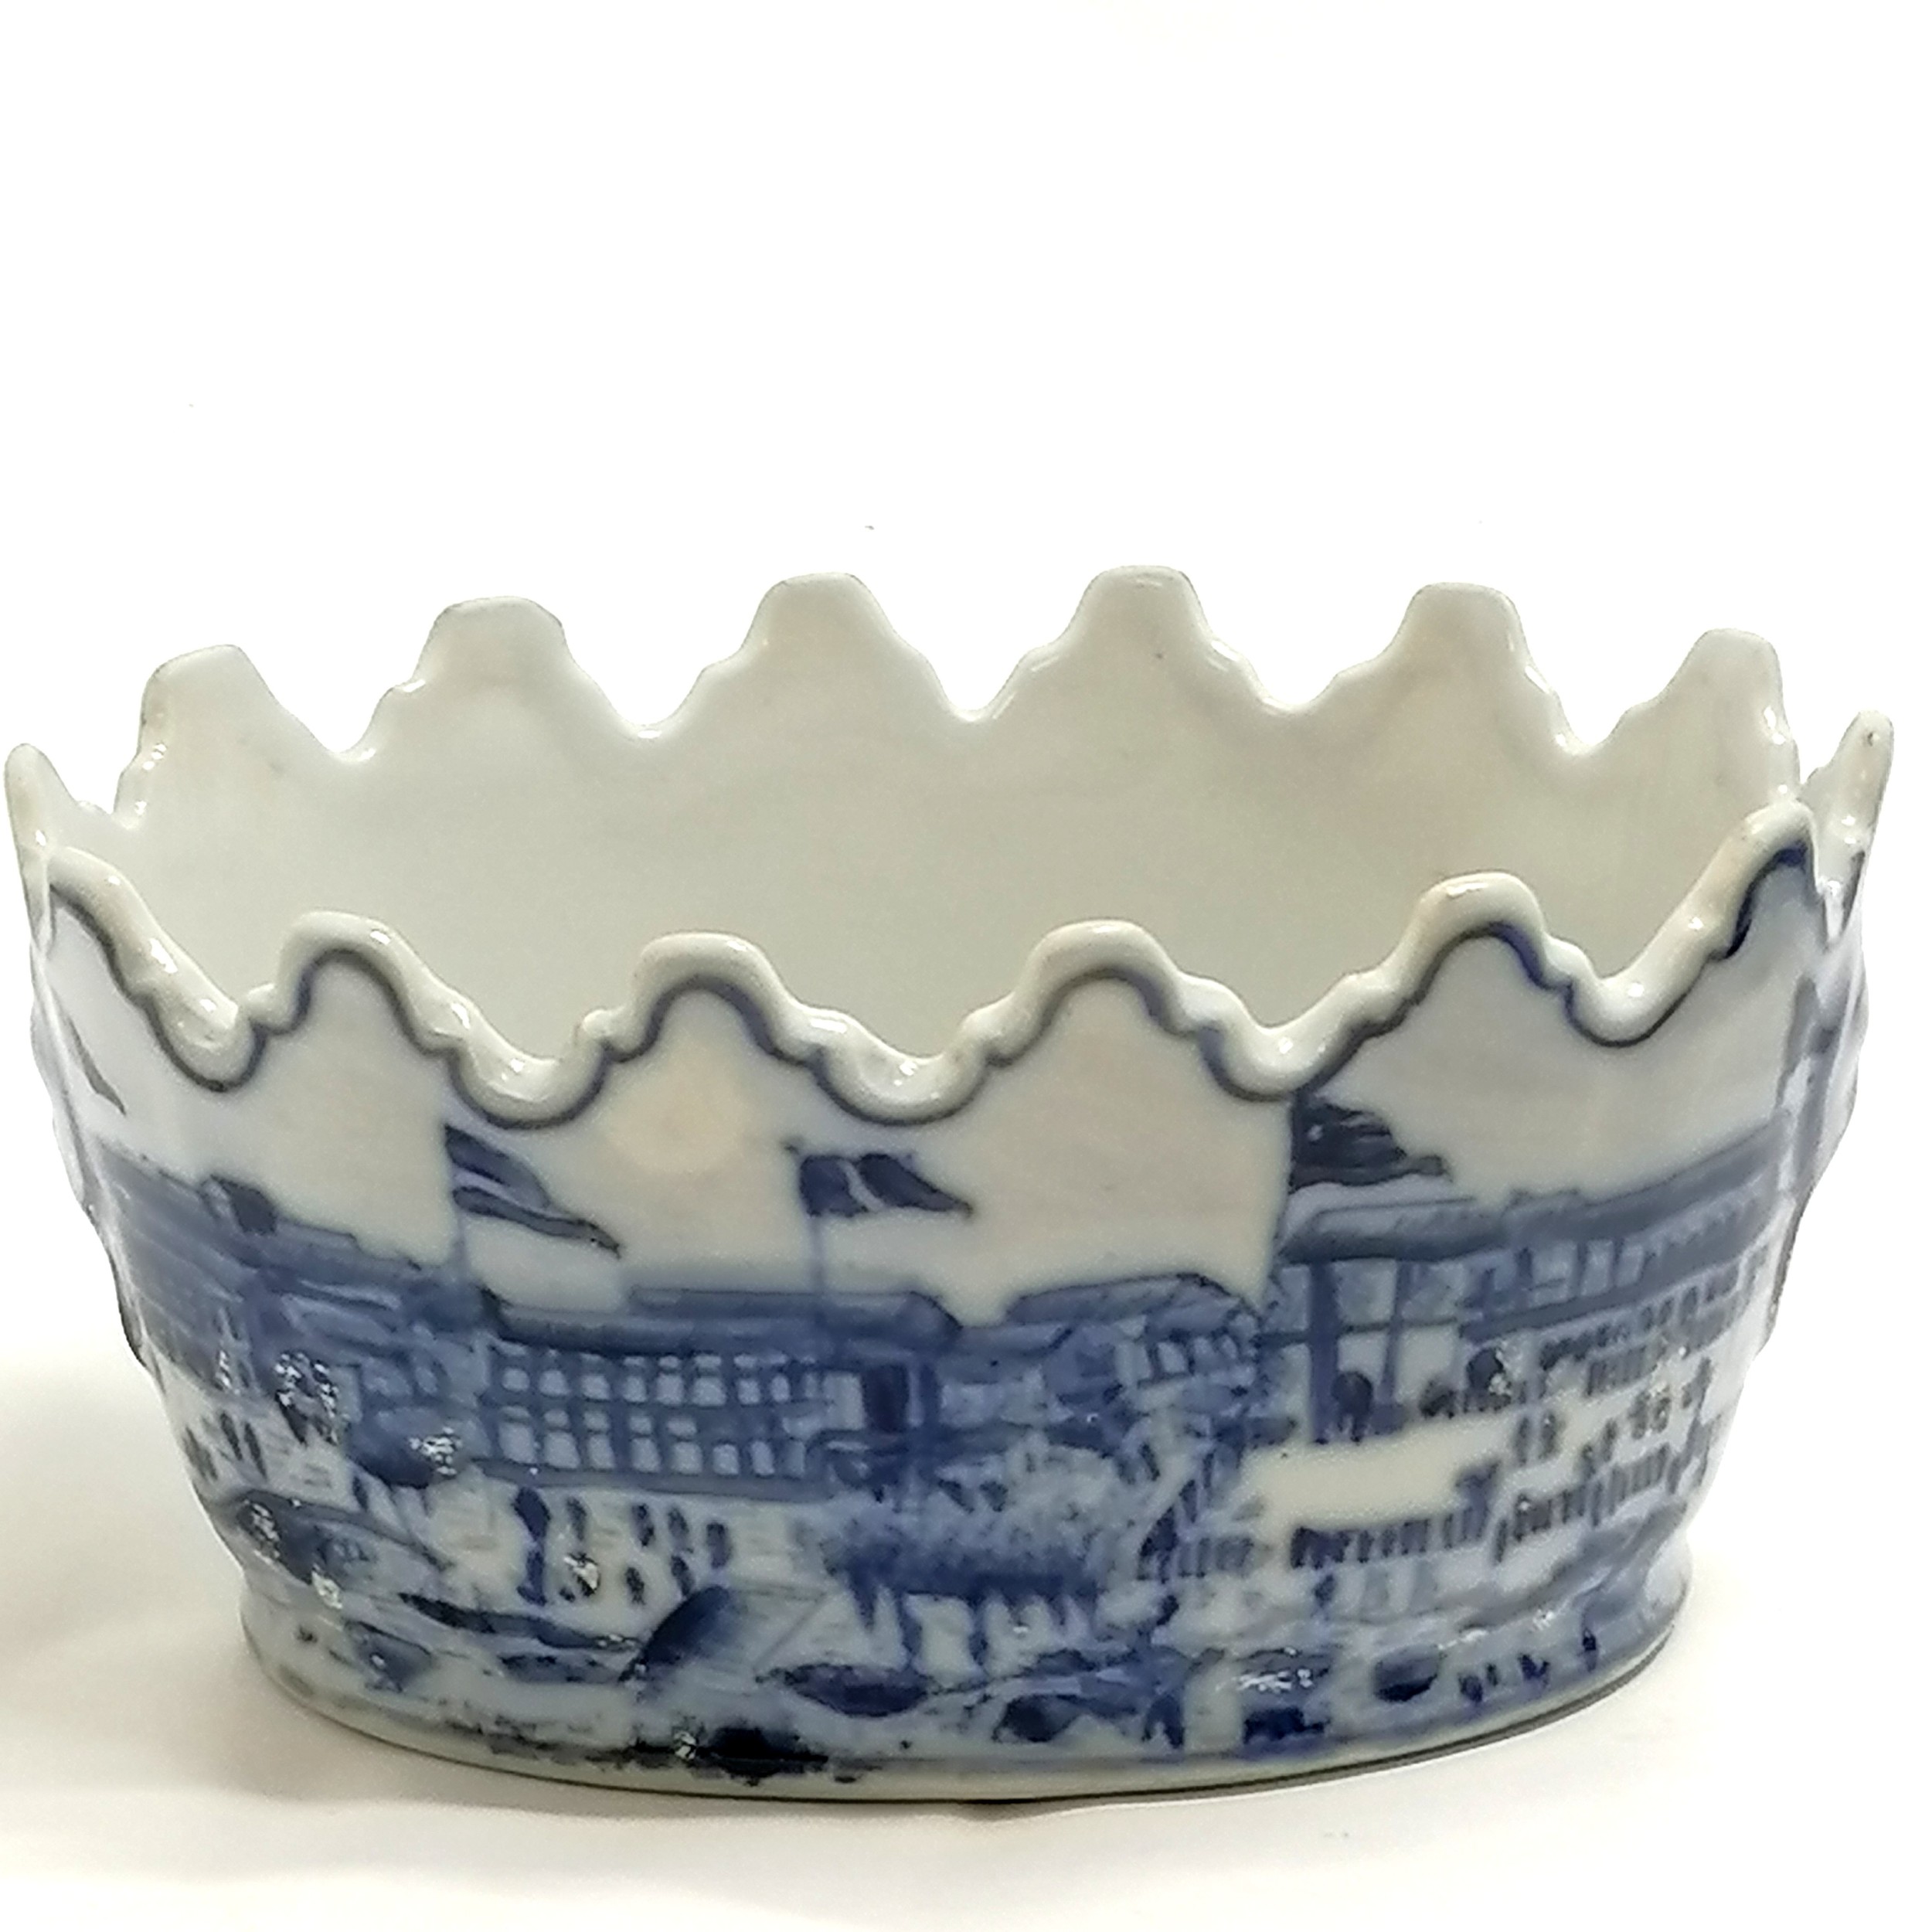 Blue & white transfer decorated cache pot with exhibition detail with lion mask detail handles - - Image 3 of 4